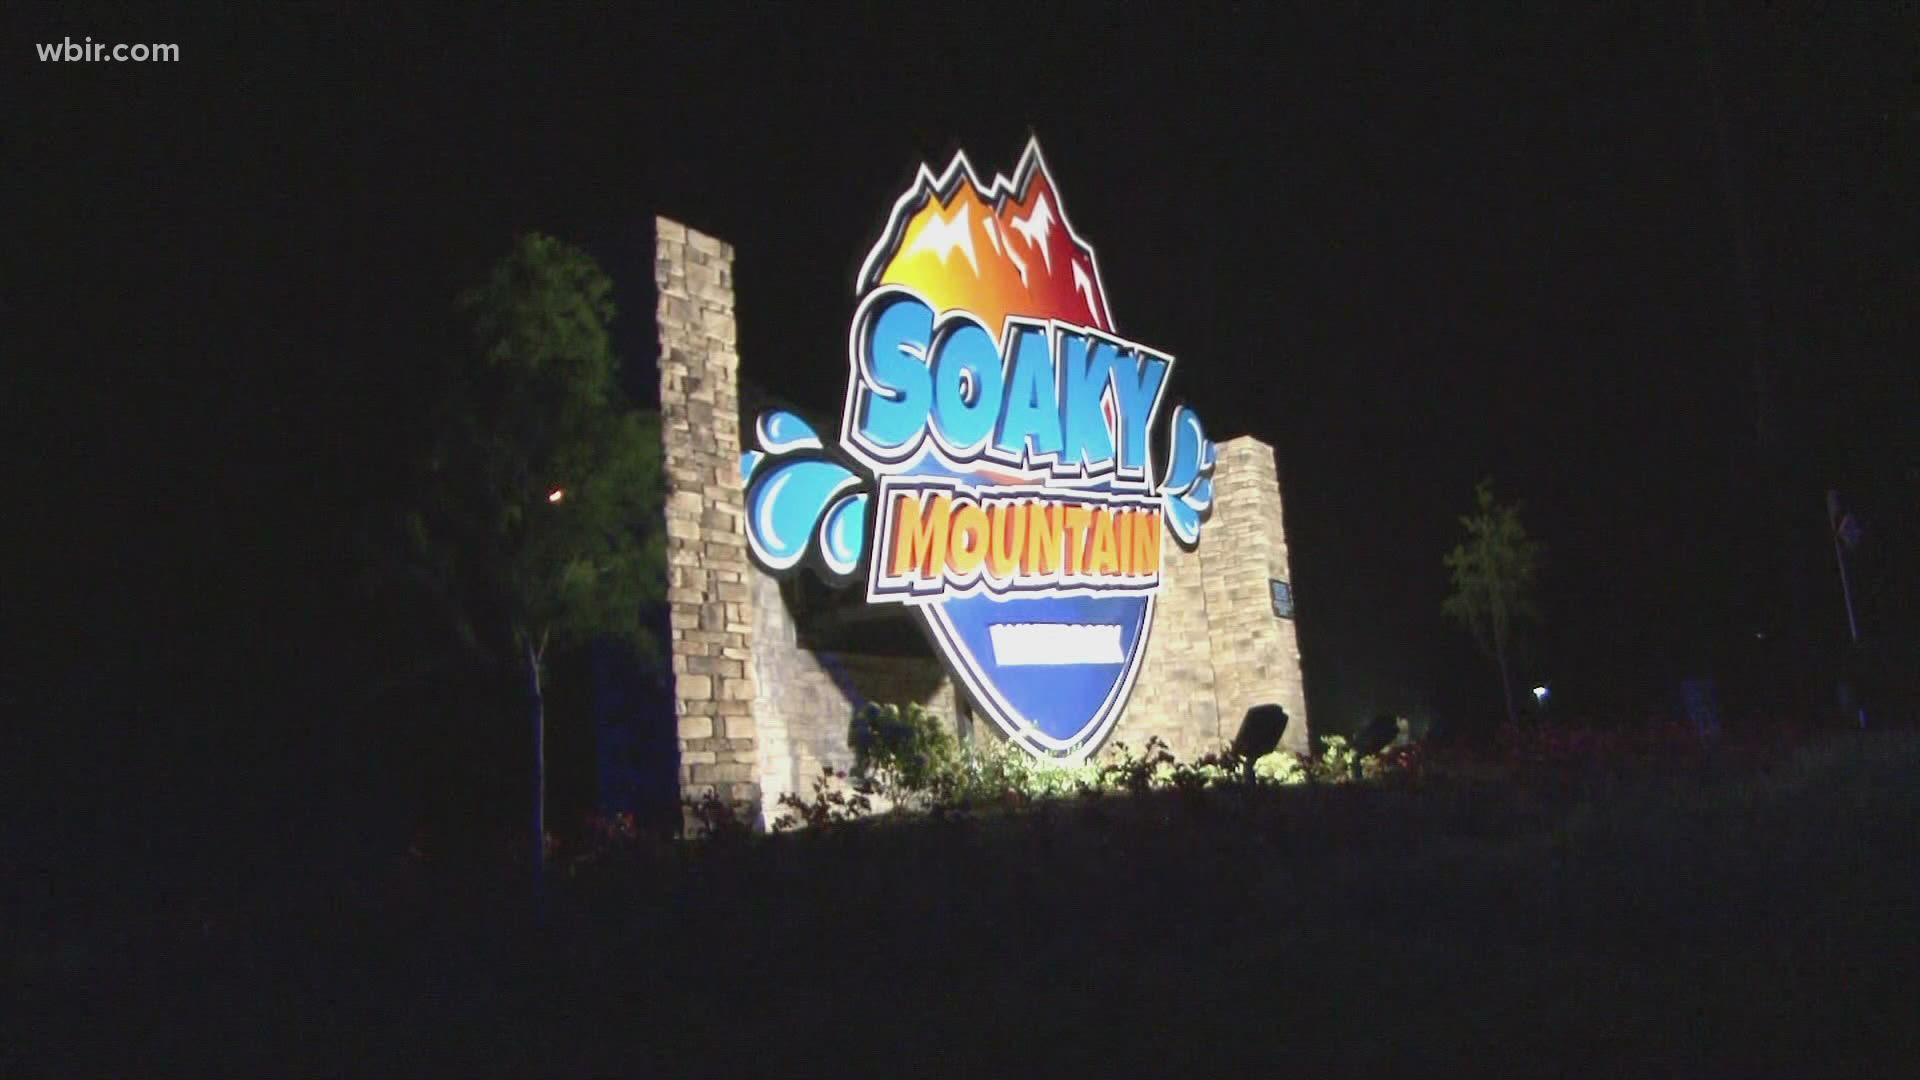 Soaky Mountain managers said they'll cooperate as state alcohol authorities recommend a license suspension for the waterpark.